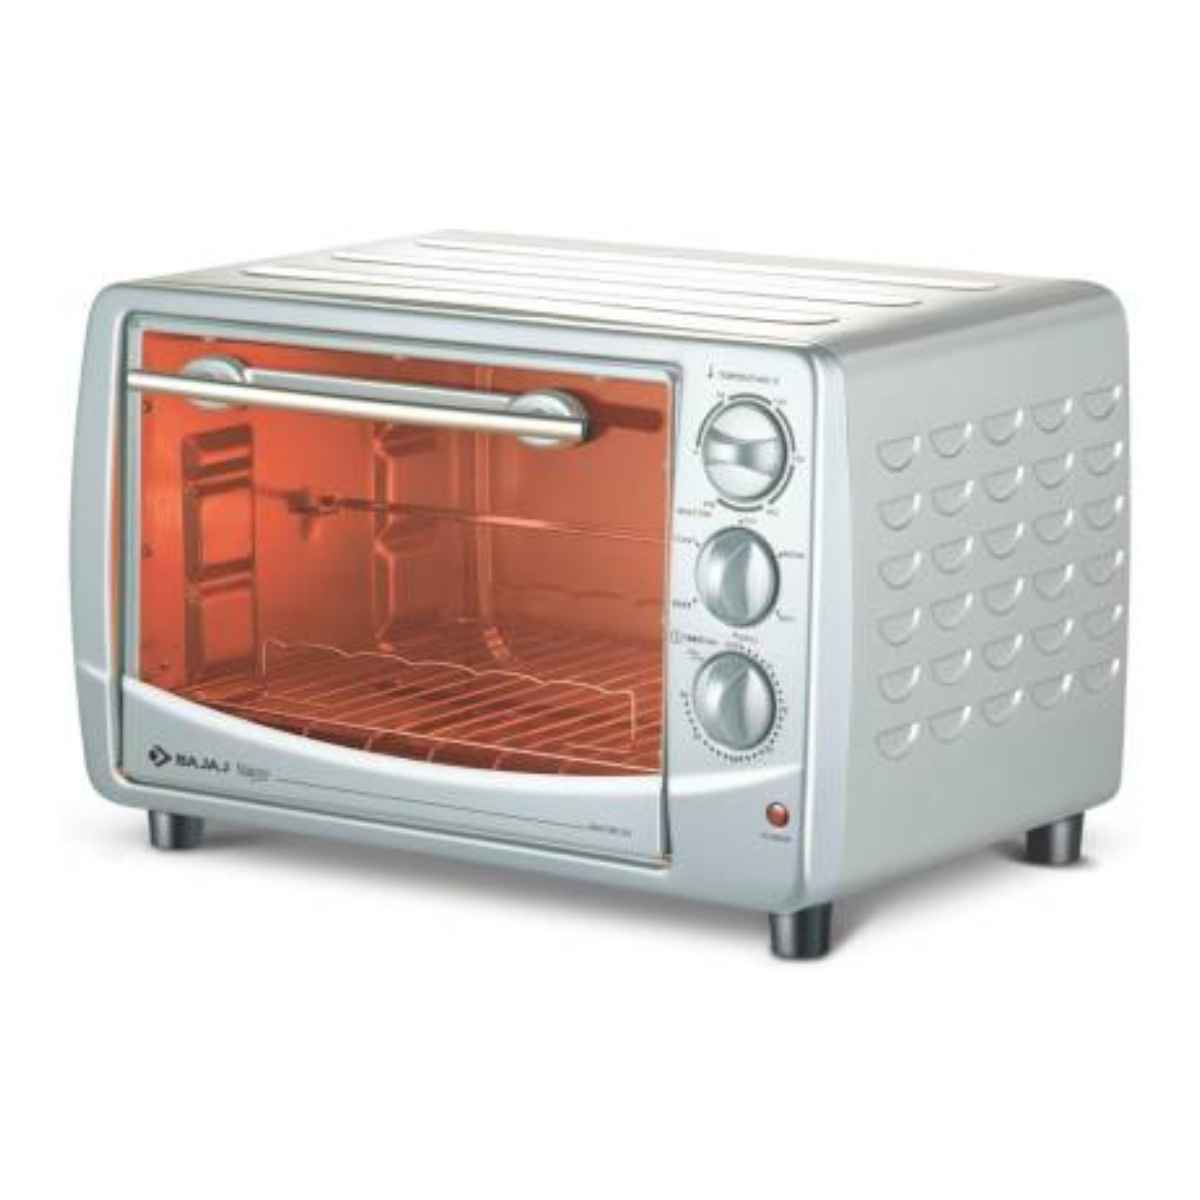 BAJAJ 28-Litre Majesty 2800 TMCSS Oven Toaster Grill 